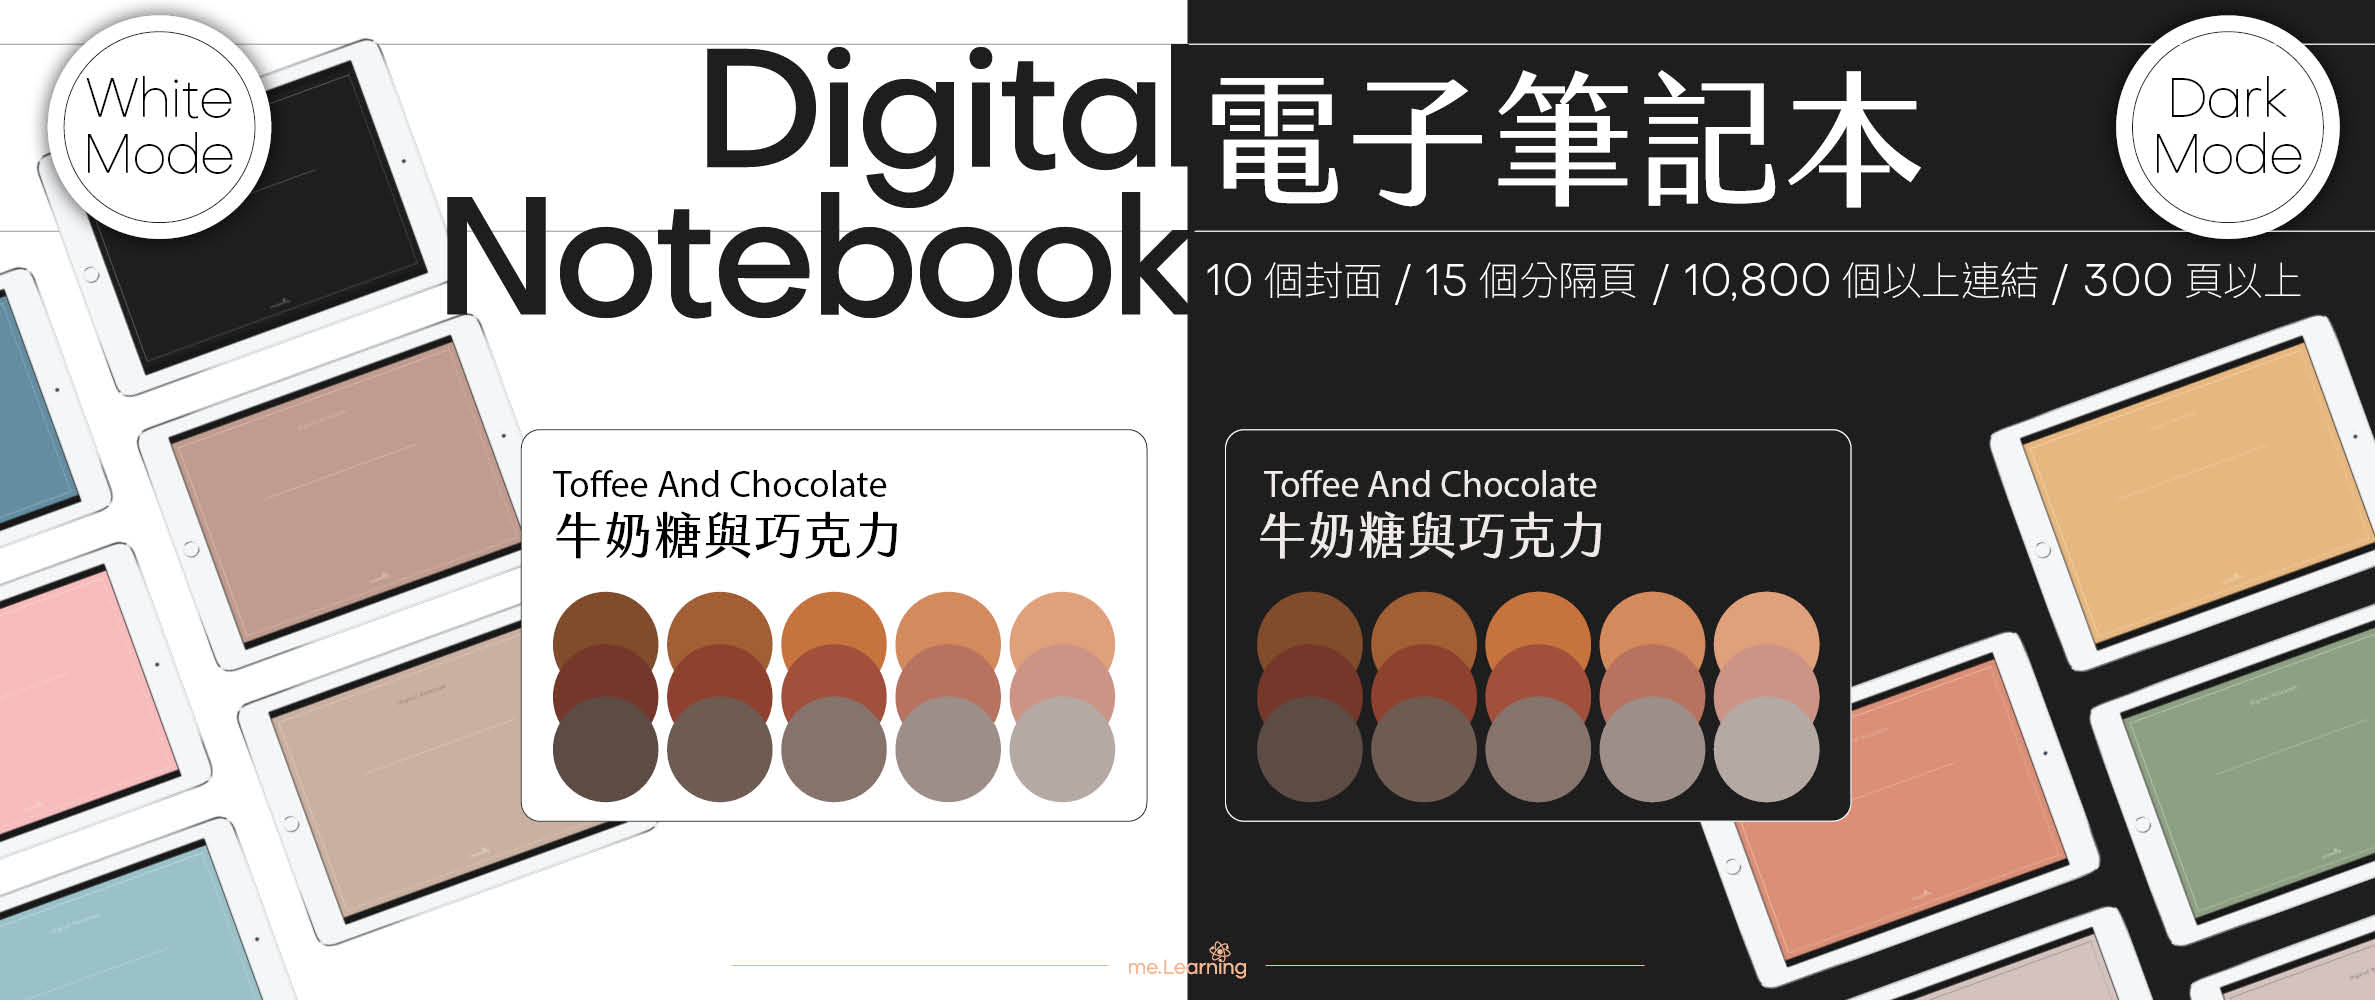 Notebook-Landscape-Solid Color Cover-15 Tabs-Toffee And Chocolate-White Mode 不想念書時上市 | me.Learning